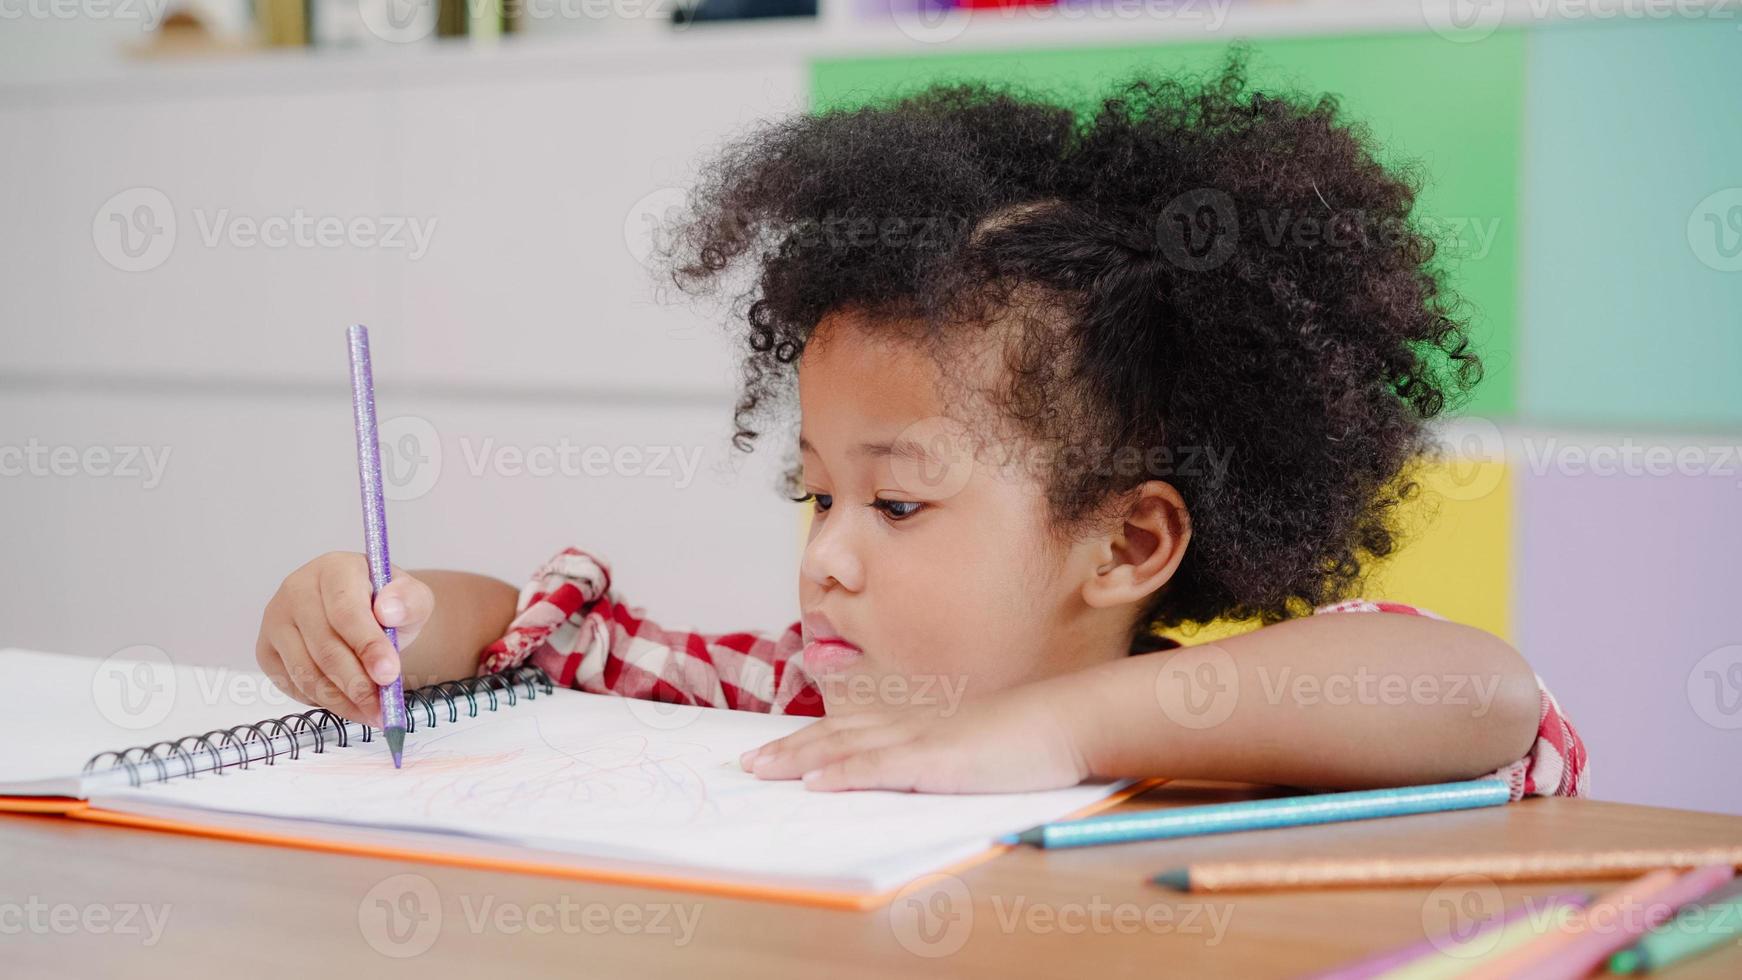 African kids drawing and do homework in classroom, young girl happy funny study and play painting on paper at elementary school. Kid drawing and painting at school concept. photo